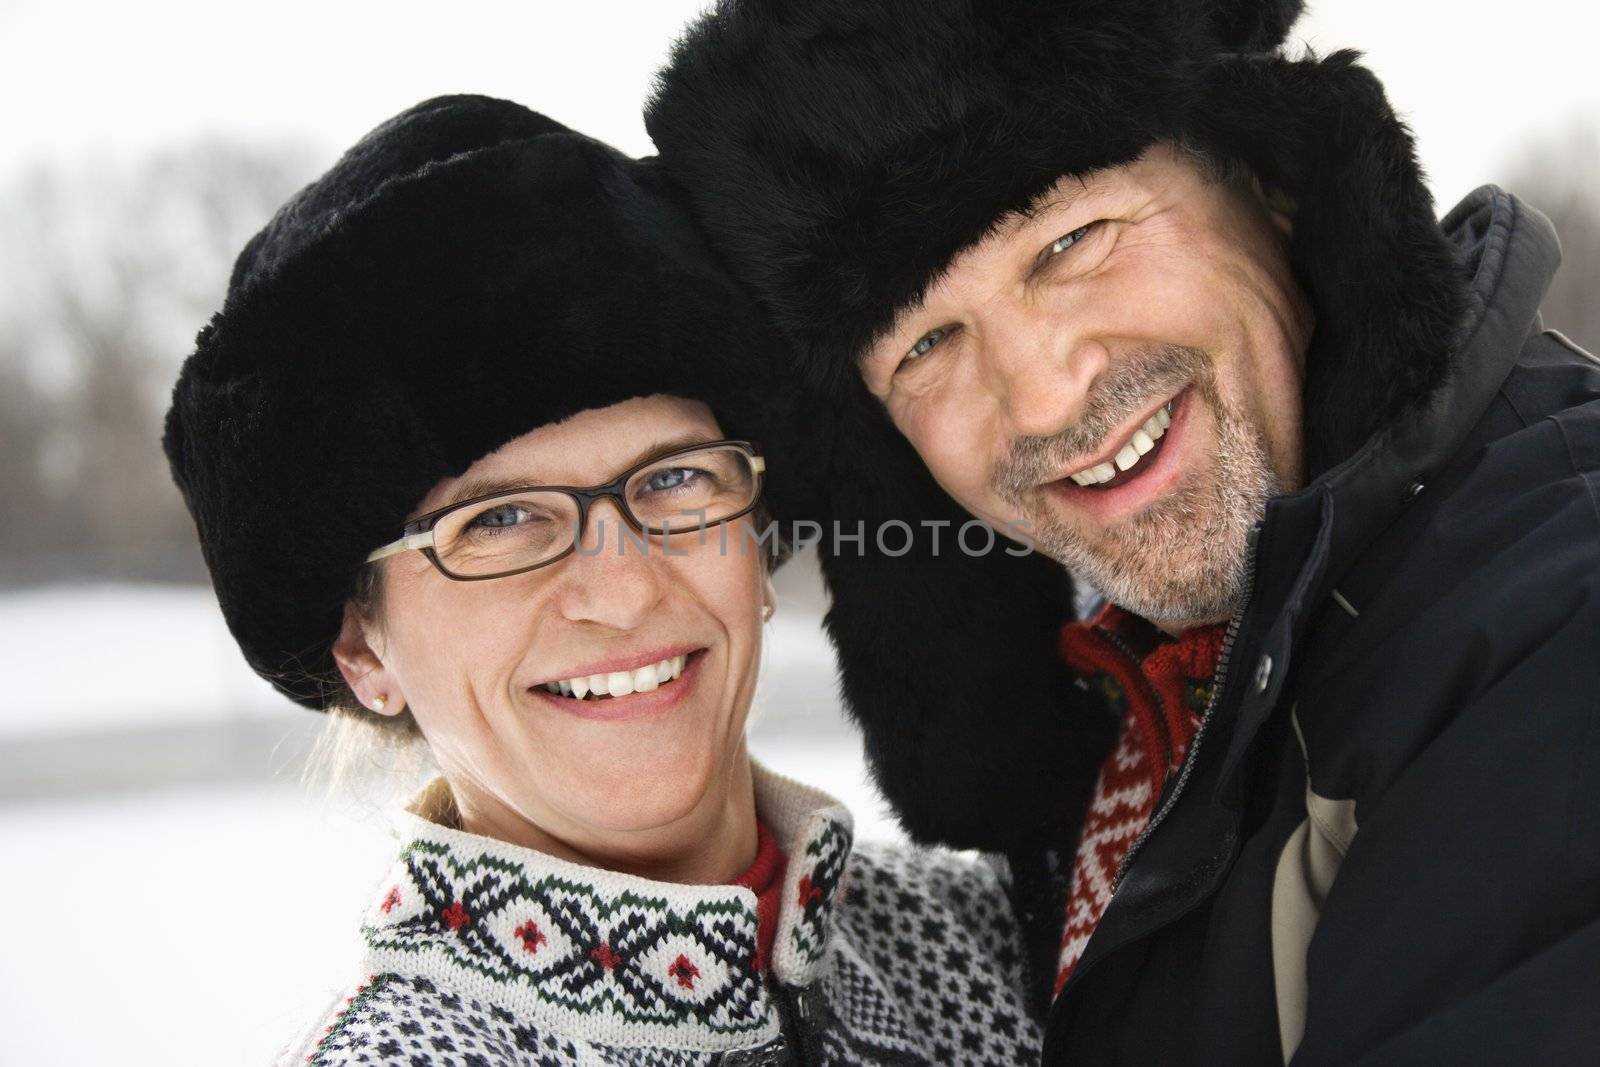 Portrait of happy Caucasian middle aged man and woman in winter clothing and black hats looking at viewer smiling.